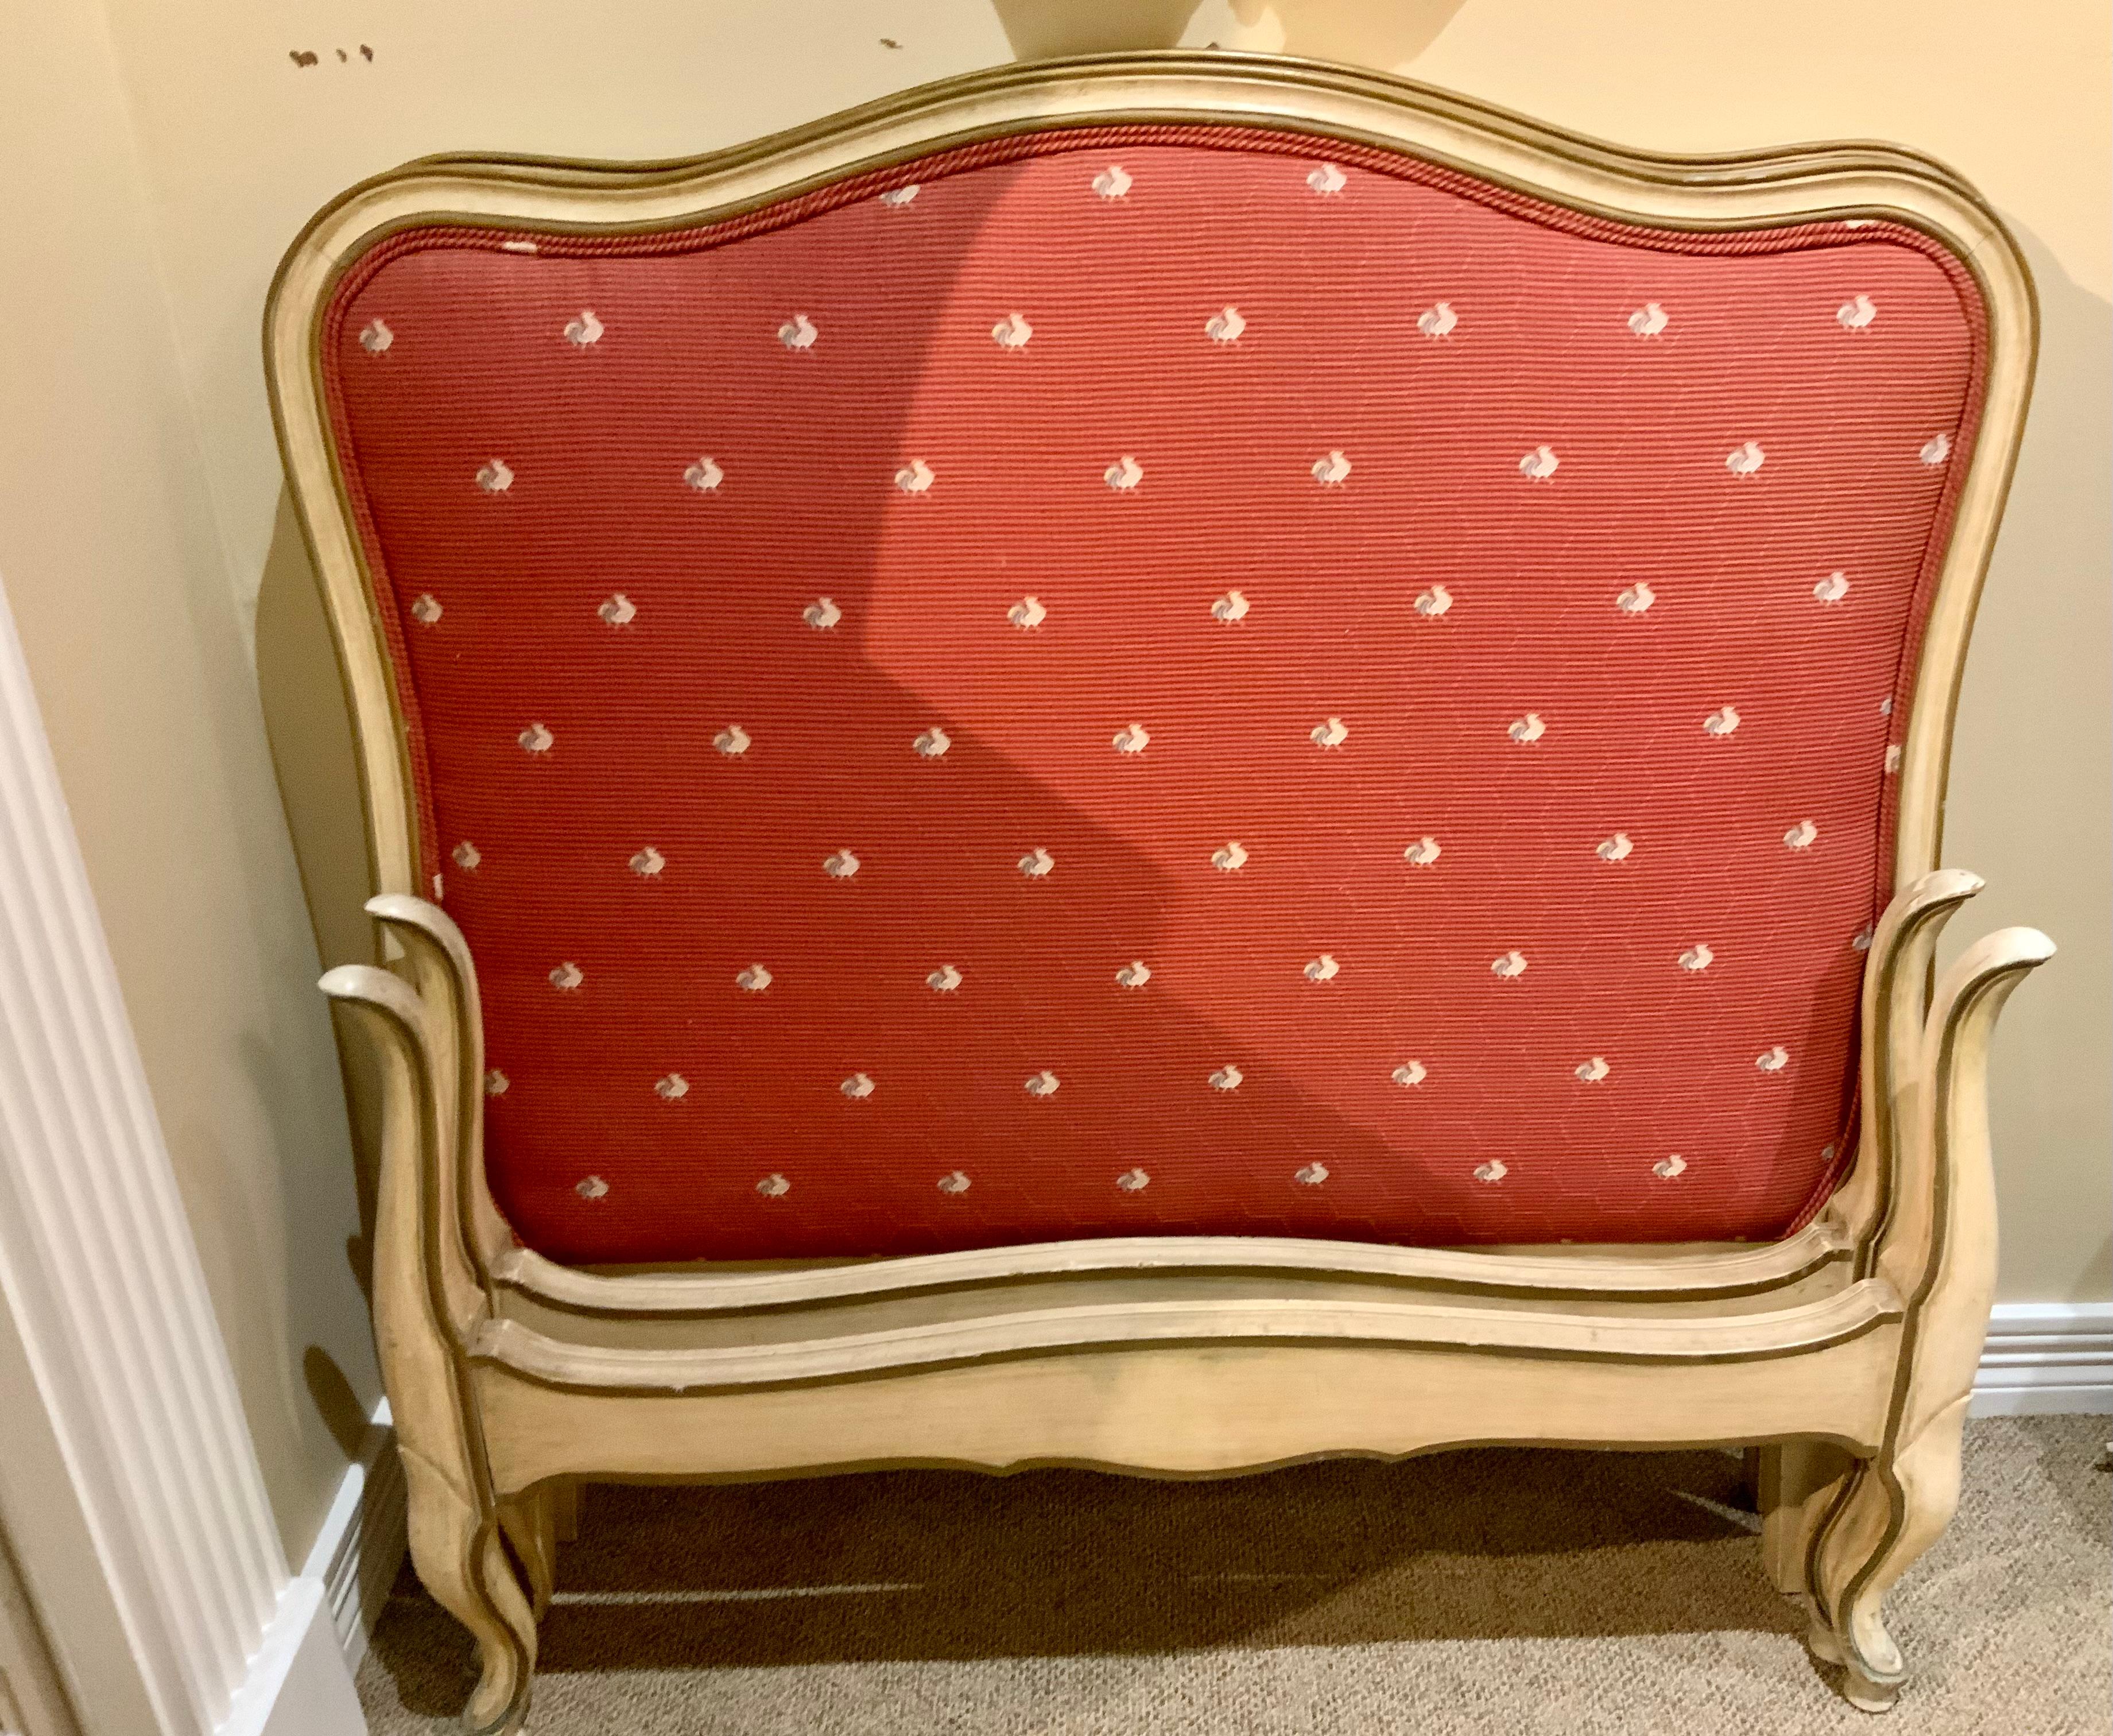 Handsome pair of French twin beds that are complete with
Headboards, footboards and side rails. They are upholstered 
In a red fabric with French roosters. They are sturdy and fit
A standard twin mattress. Easy to re upholster